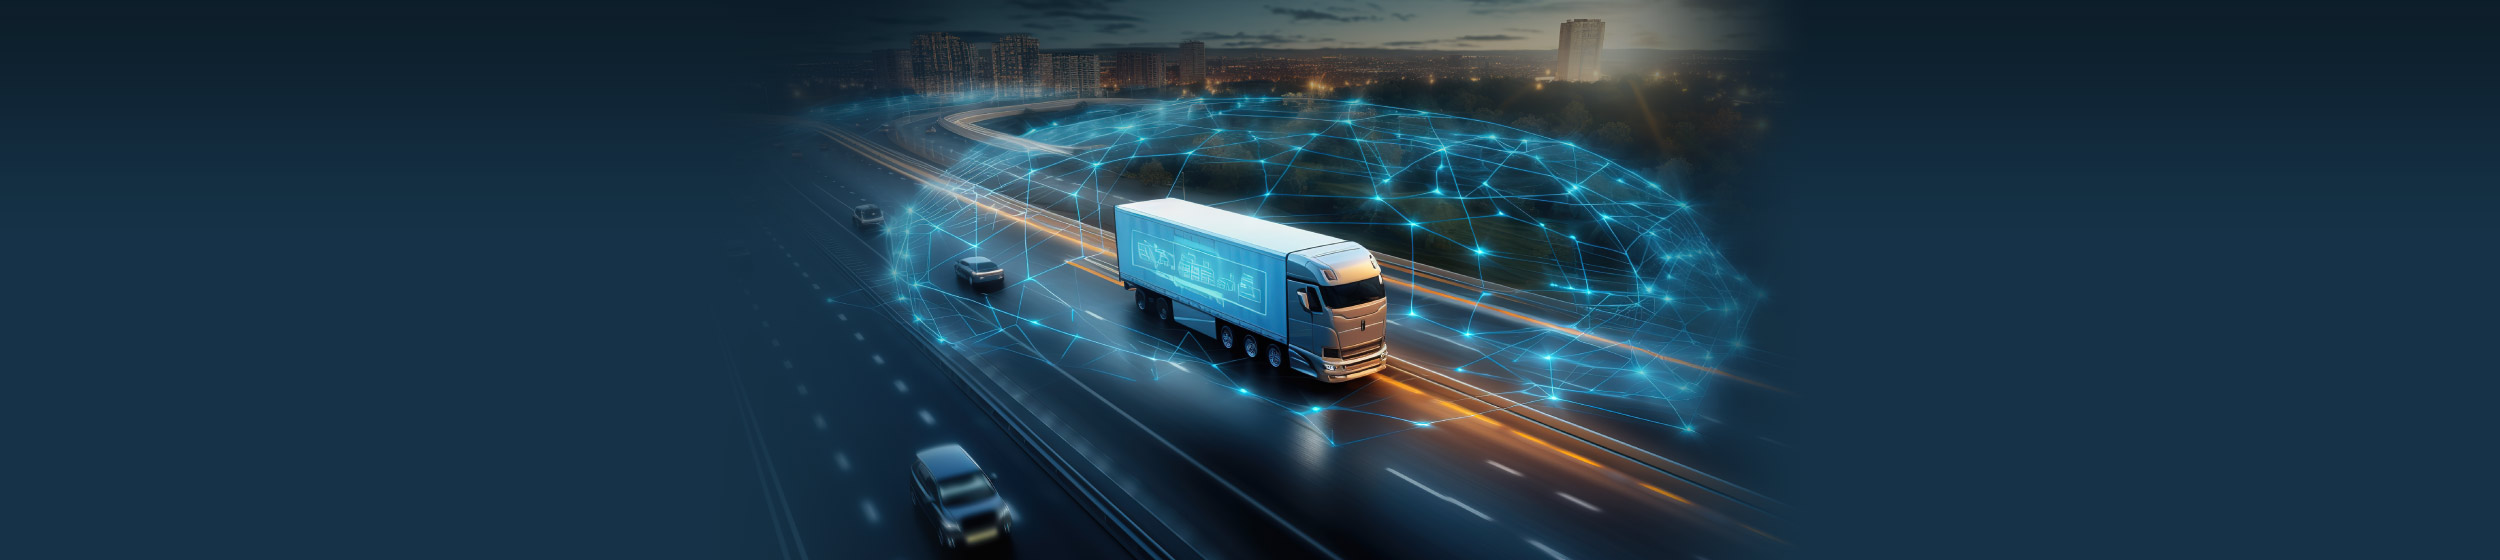 Banner-Automated Carrier Outreach​ for a $800 Bn Digital Freight Network Leader in the US